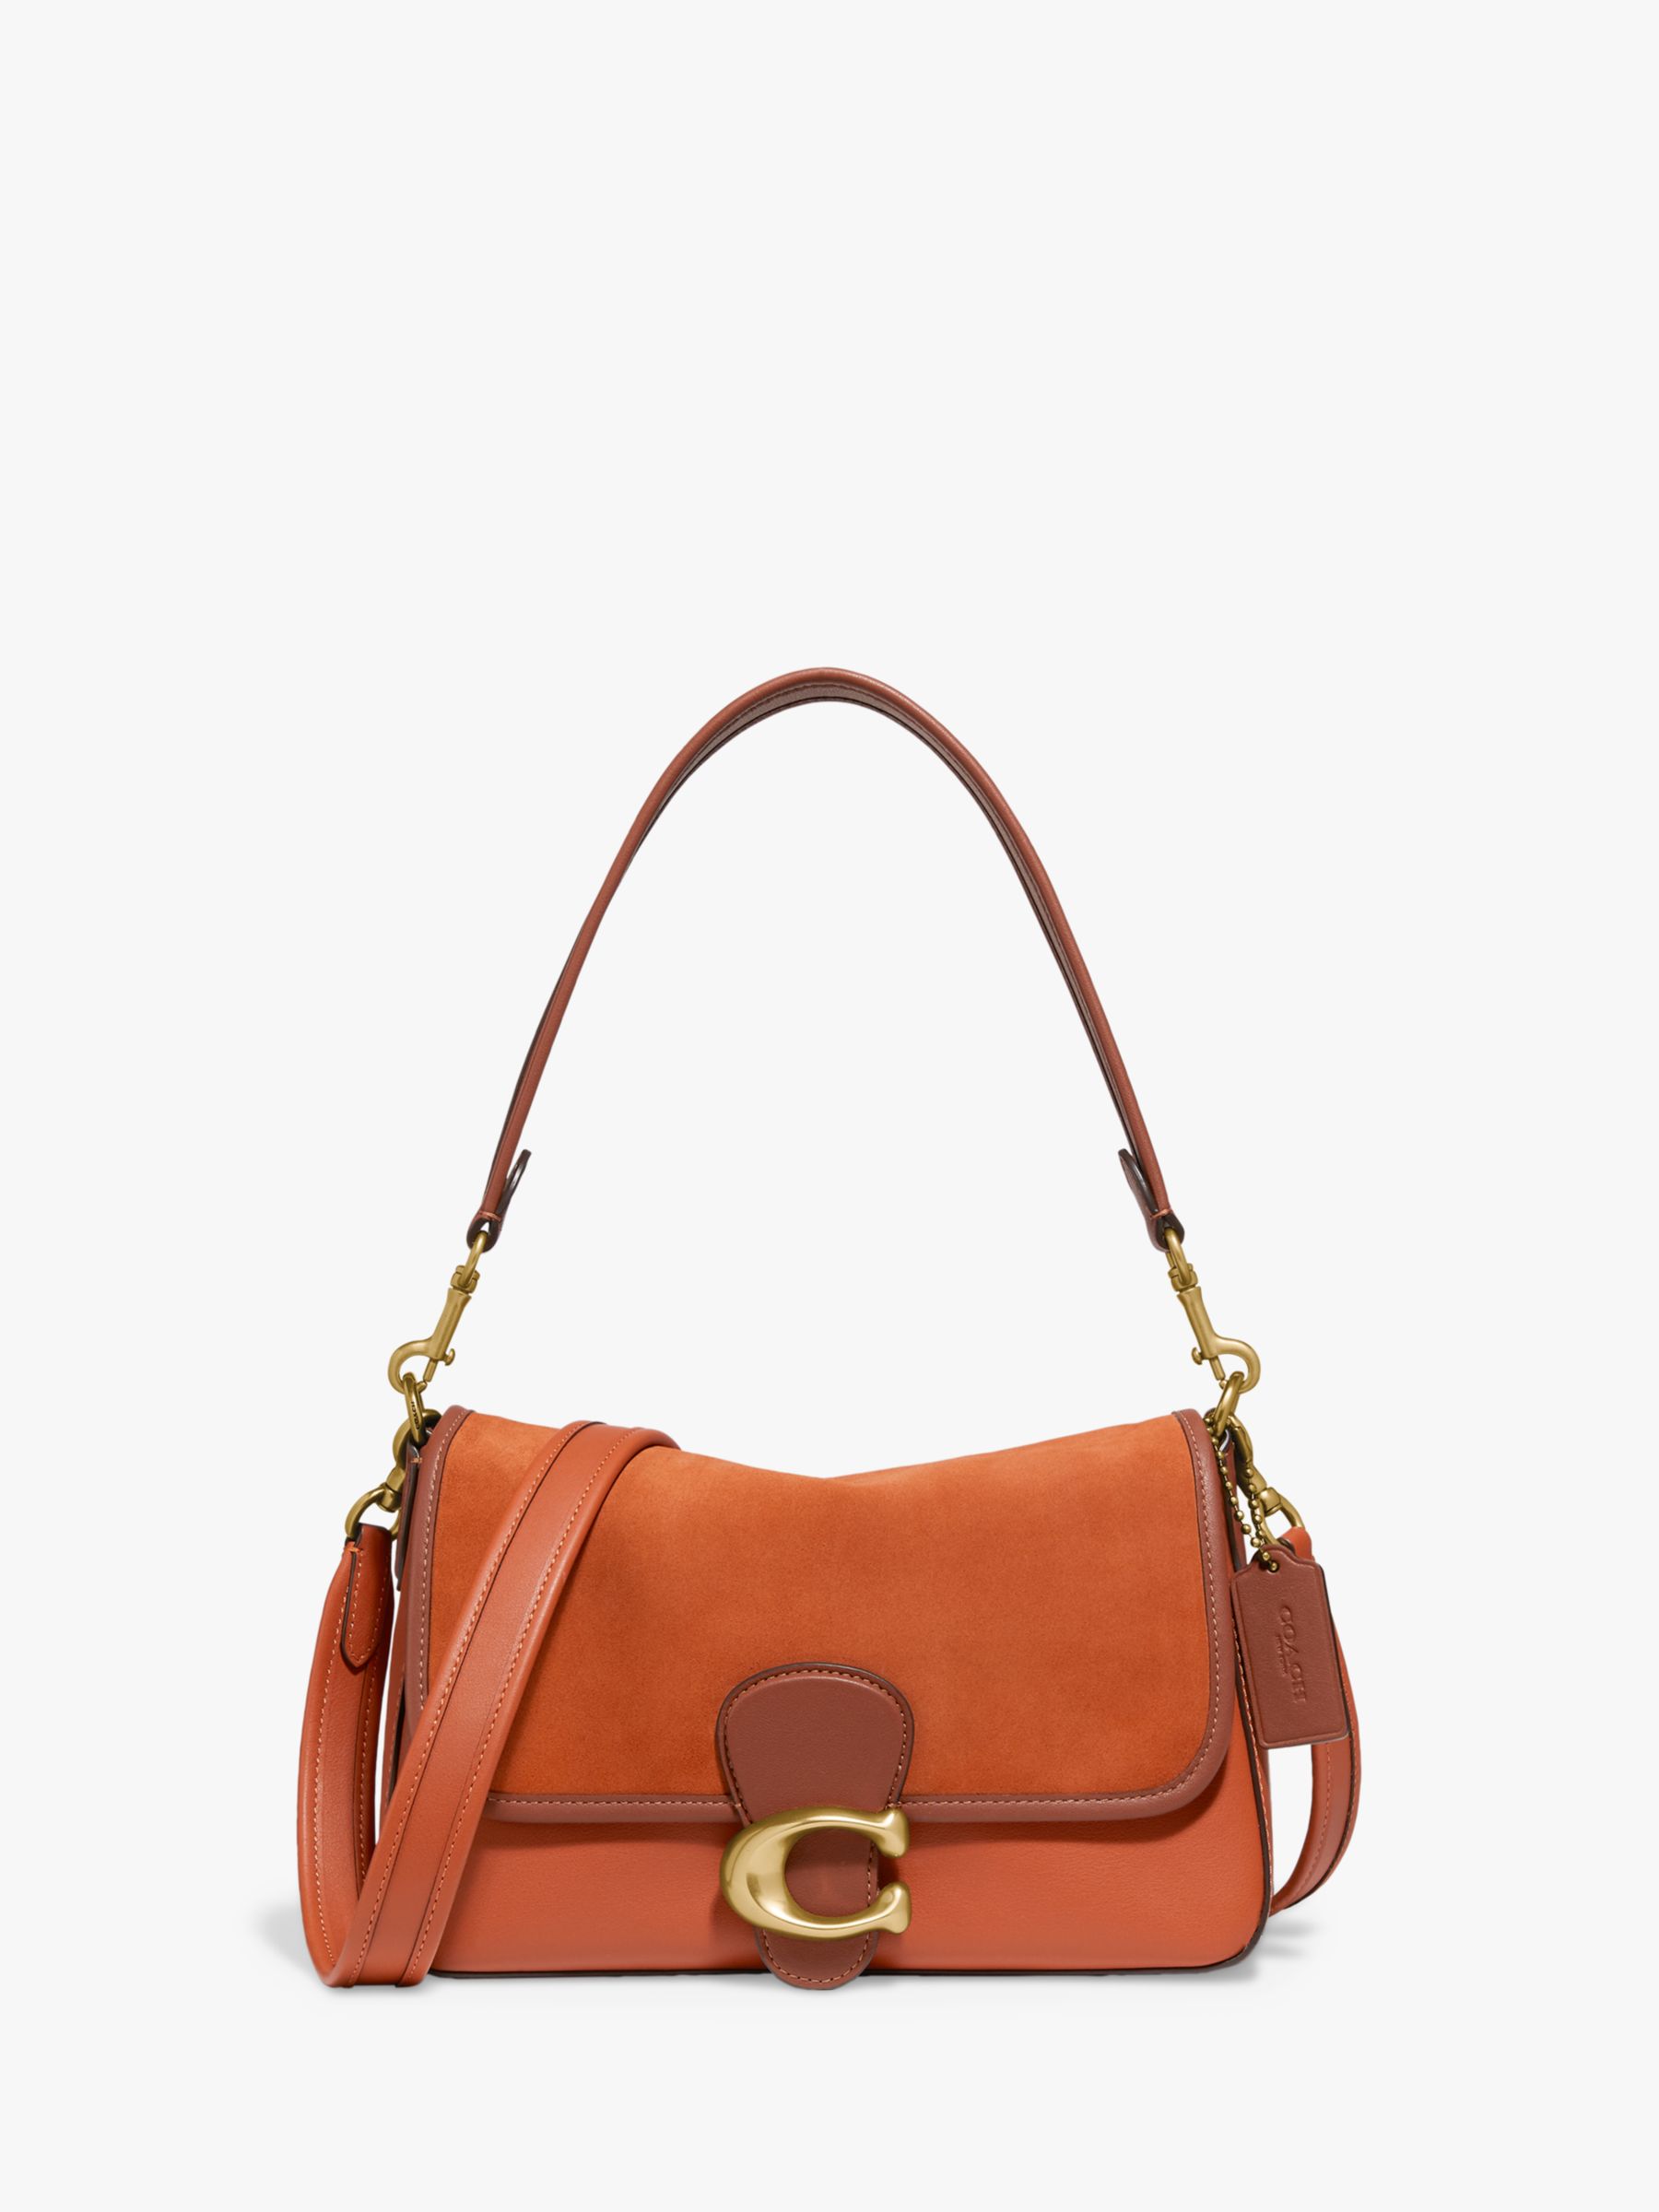 Coach Tabby Leather Shoulder Bag, Canyon